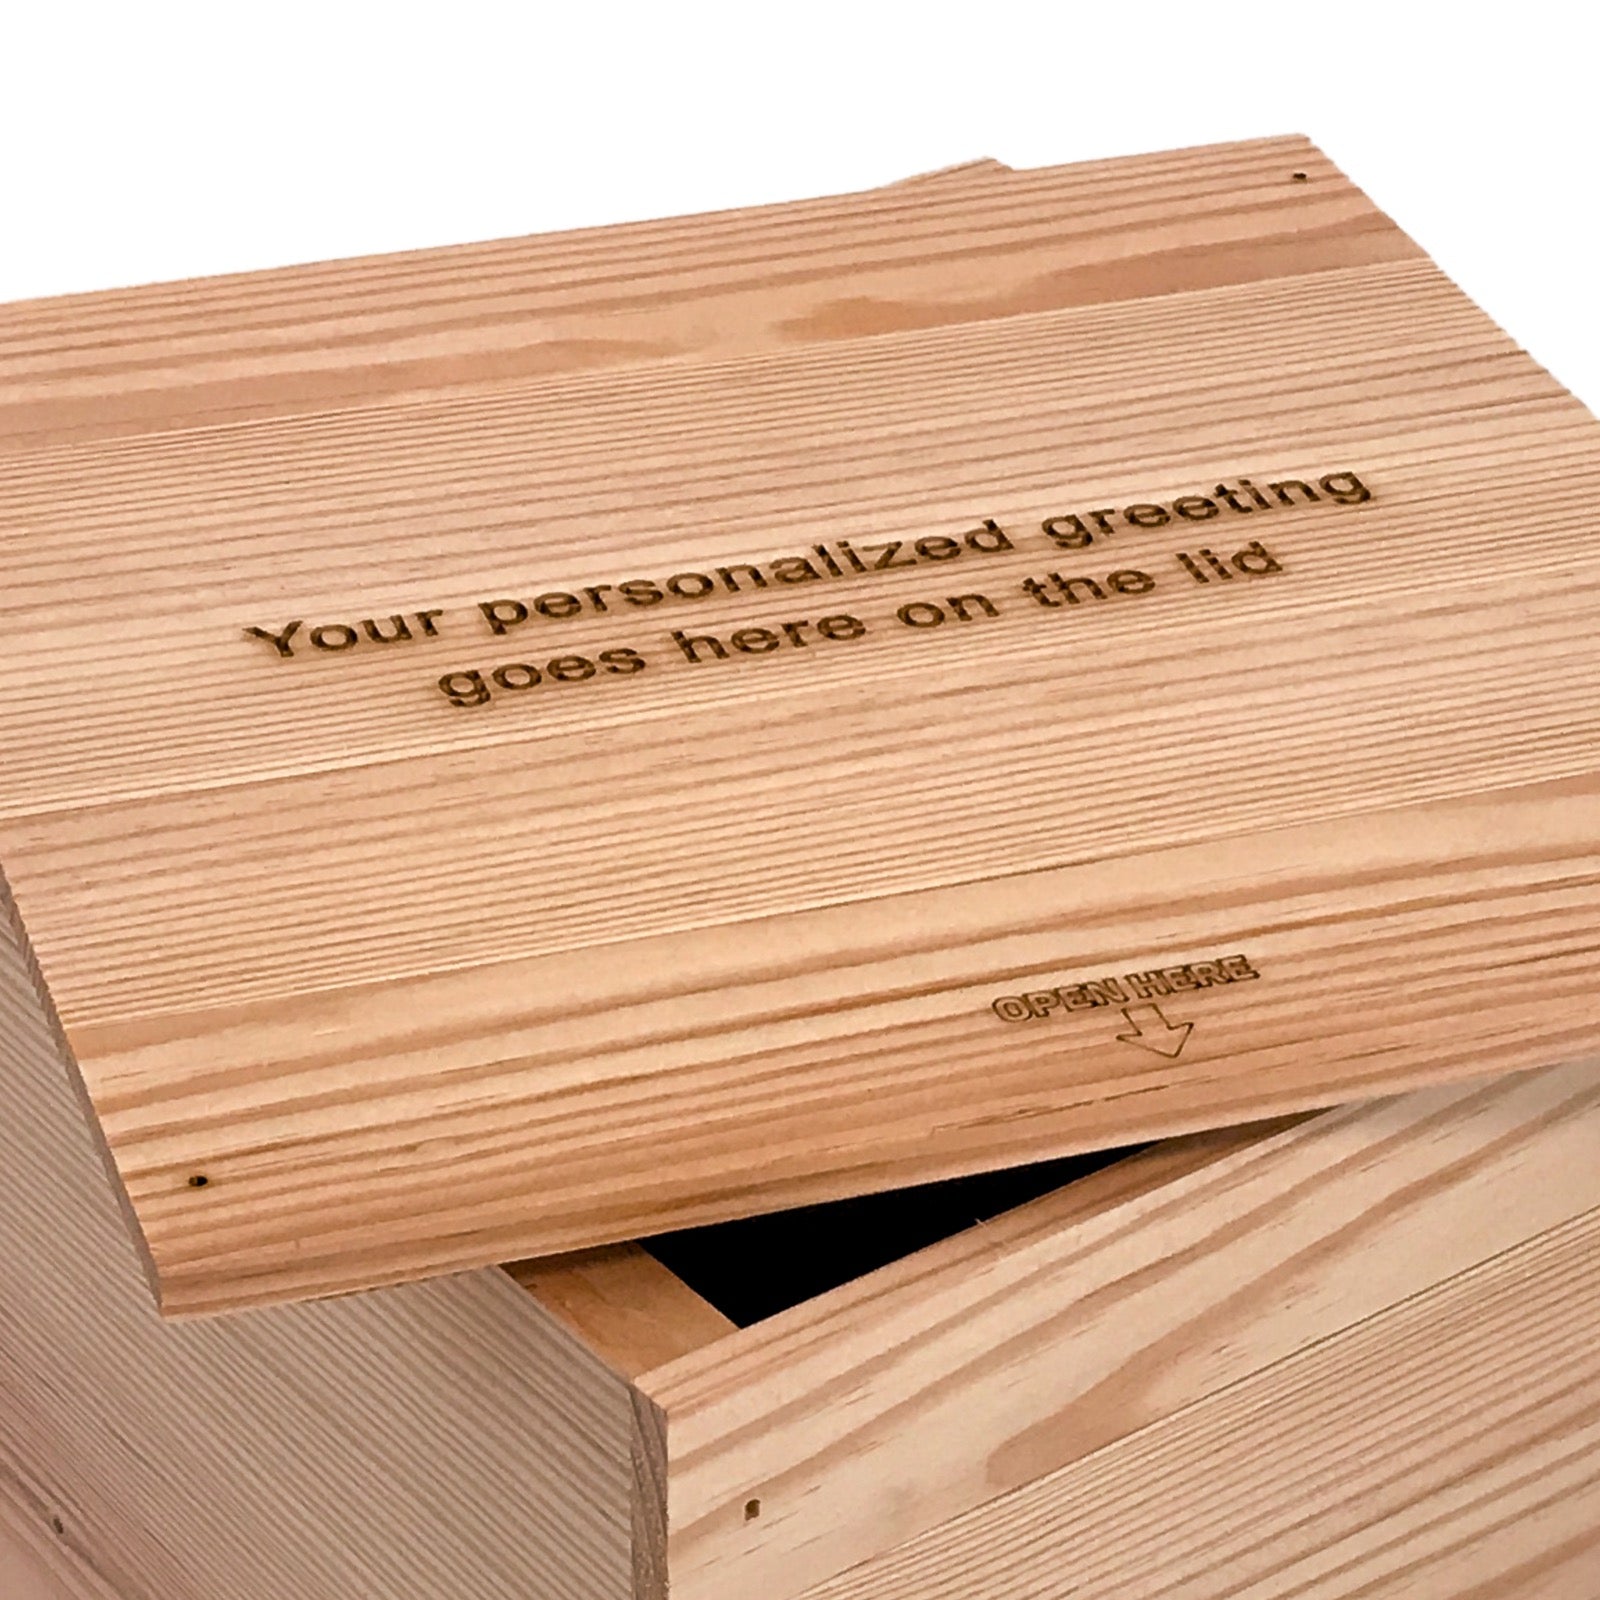 Your personalized greeting on the lid of a DIY gift crate by Carpenter Core, GK-6.25-6.375-7-GT-NW-LL, 6-GK-6.25-6.375-7-GT-NW-LL, 12-GK-6.25-6.375-7-GT-NW-LL, 24-GK-6.25-6.375-7-GT-NW-LL, 48-GK-6.25-6.375-7-GT-NW-LL, 96-GK-6.25-6.375-7-GT-NW-LL